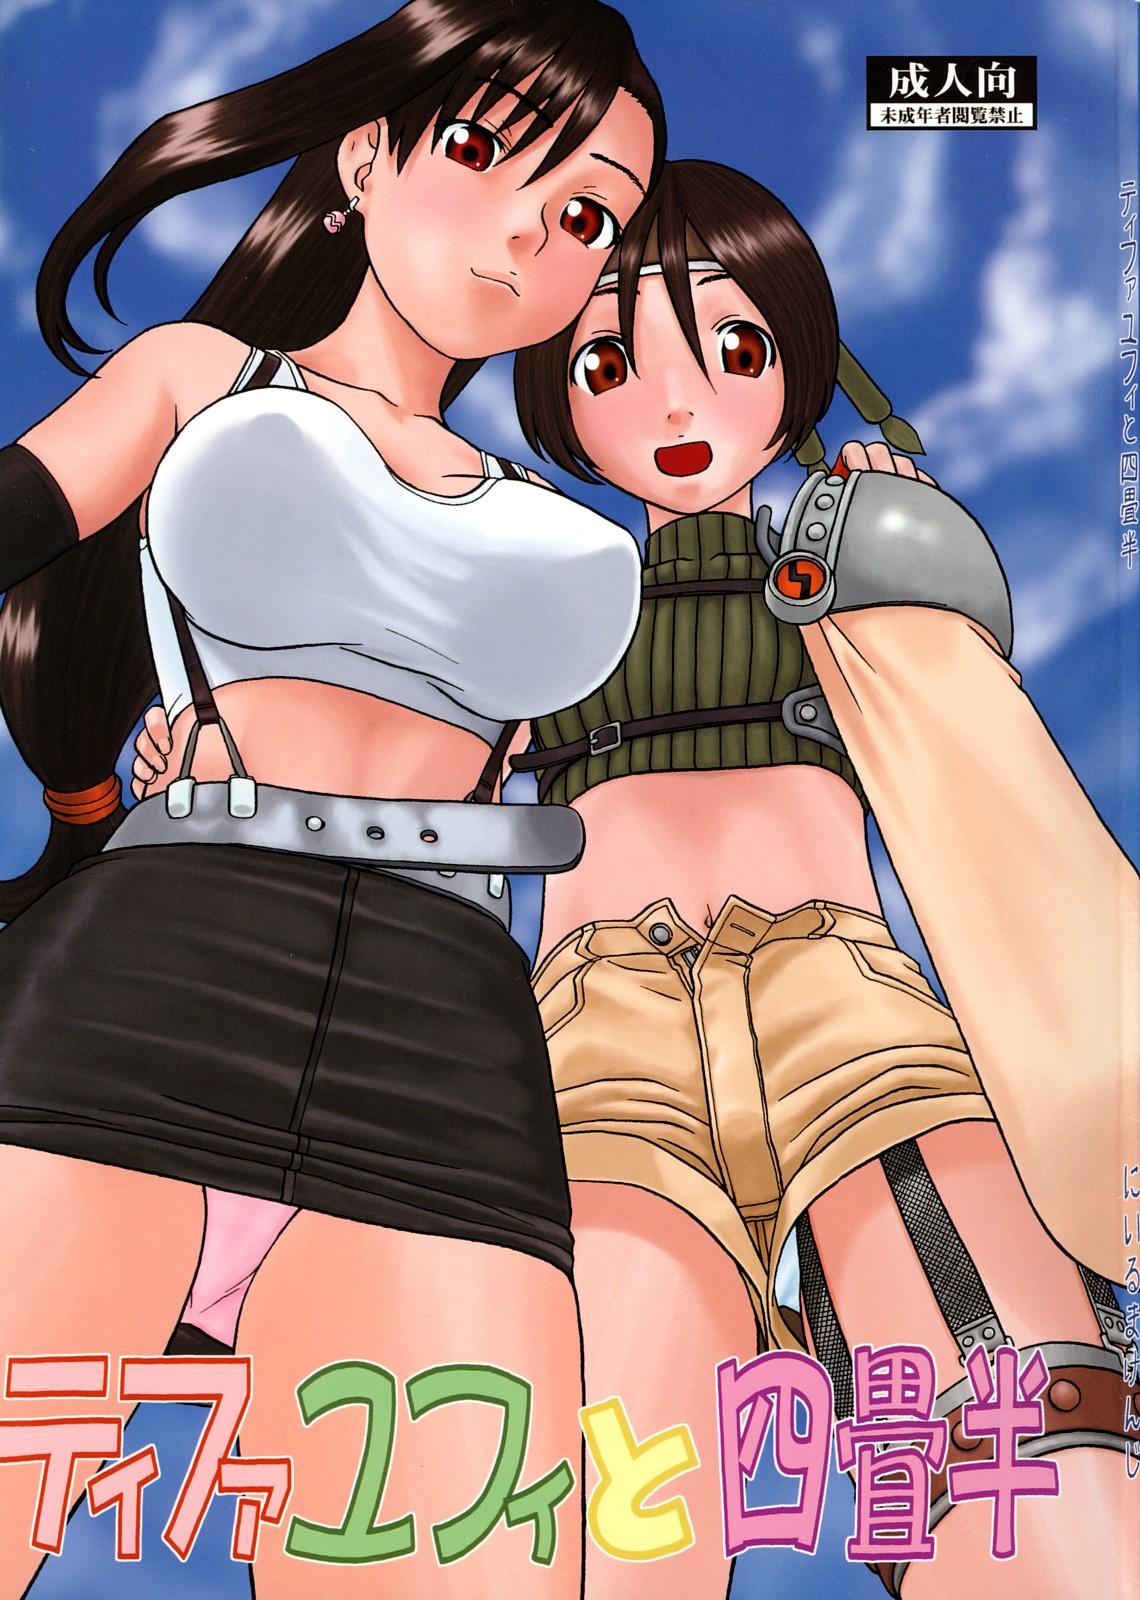 Free Blowjob Porn Tifa to Yuffie to Yojouhan - Final fantasy vii Asstomouth - Picture 1